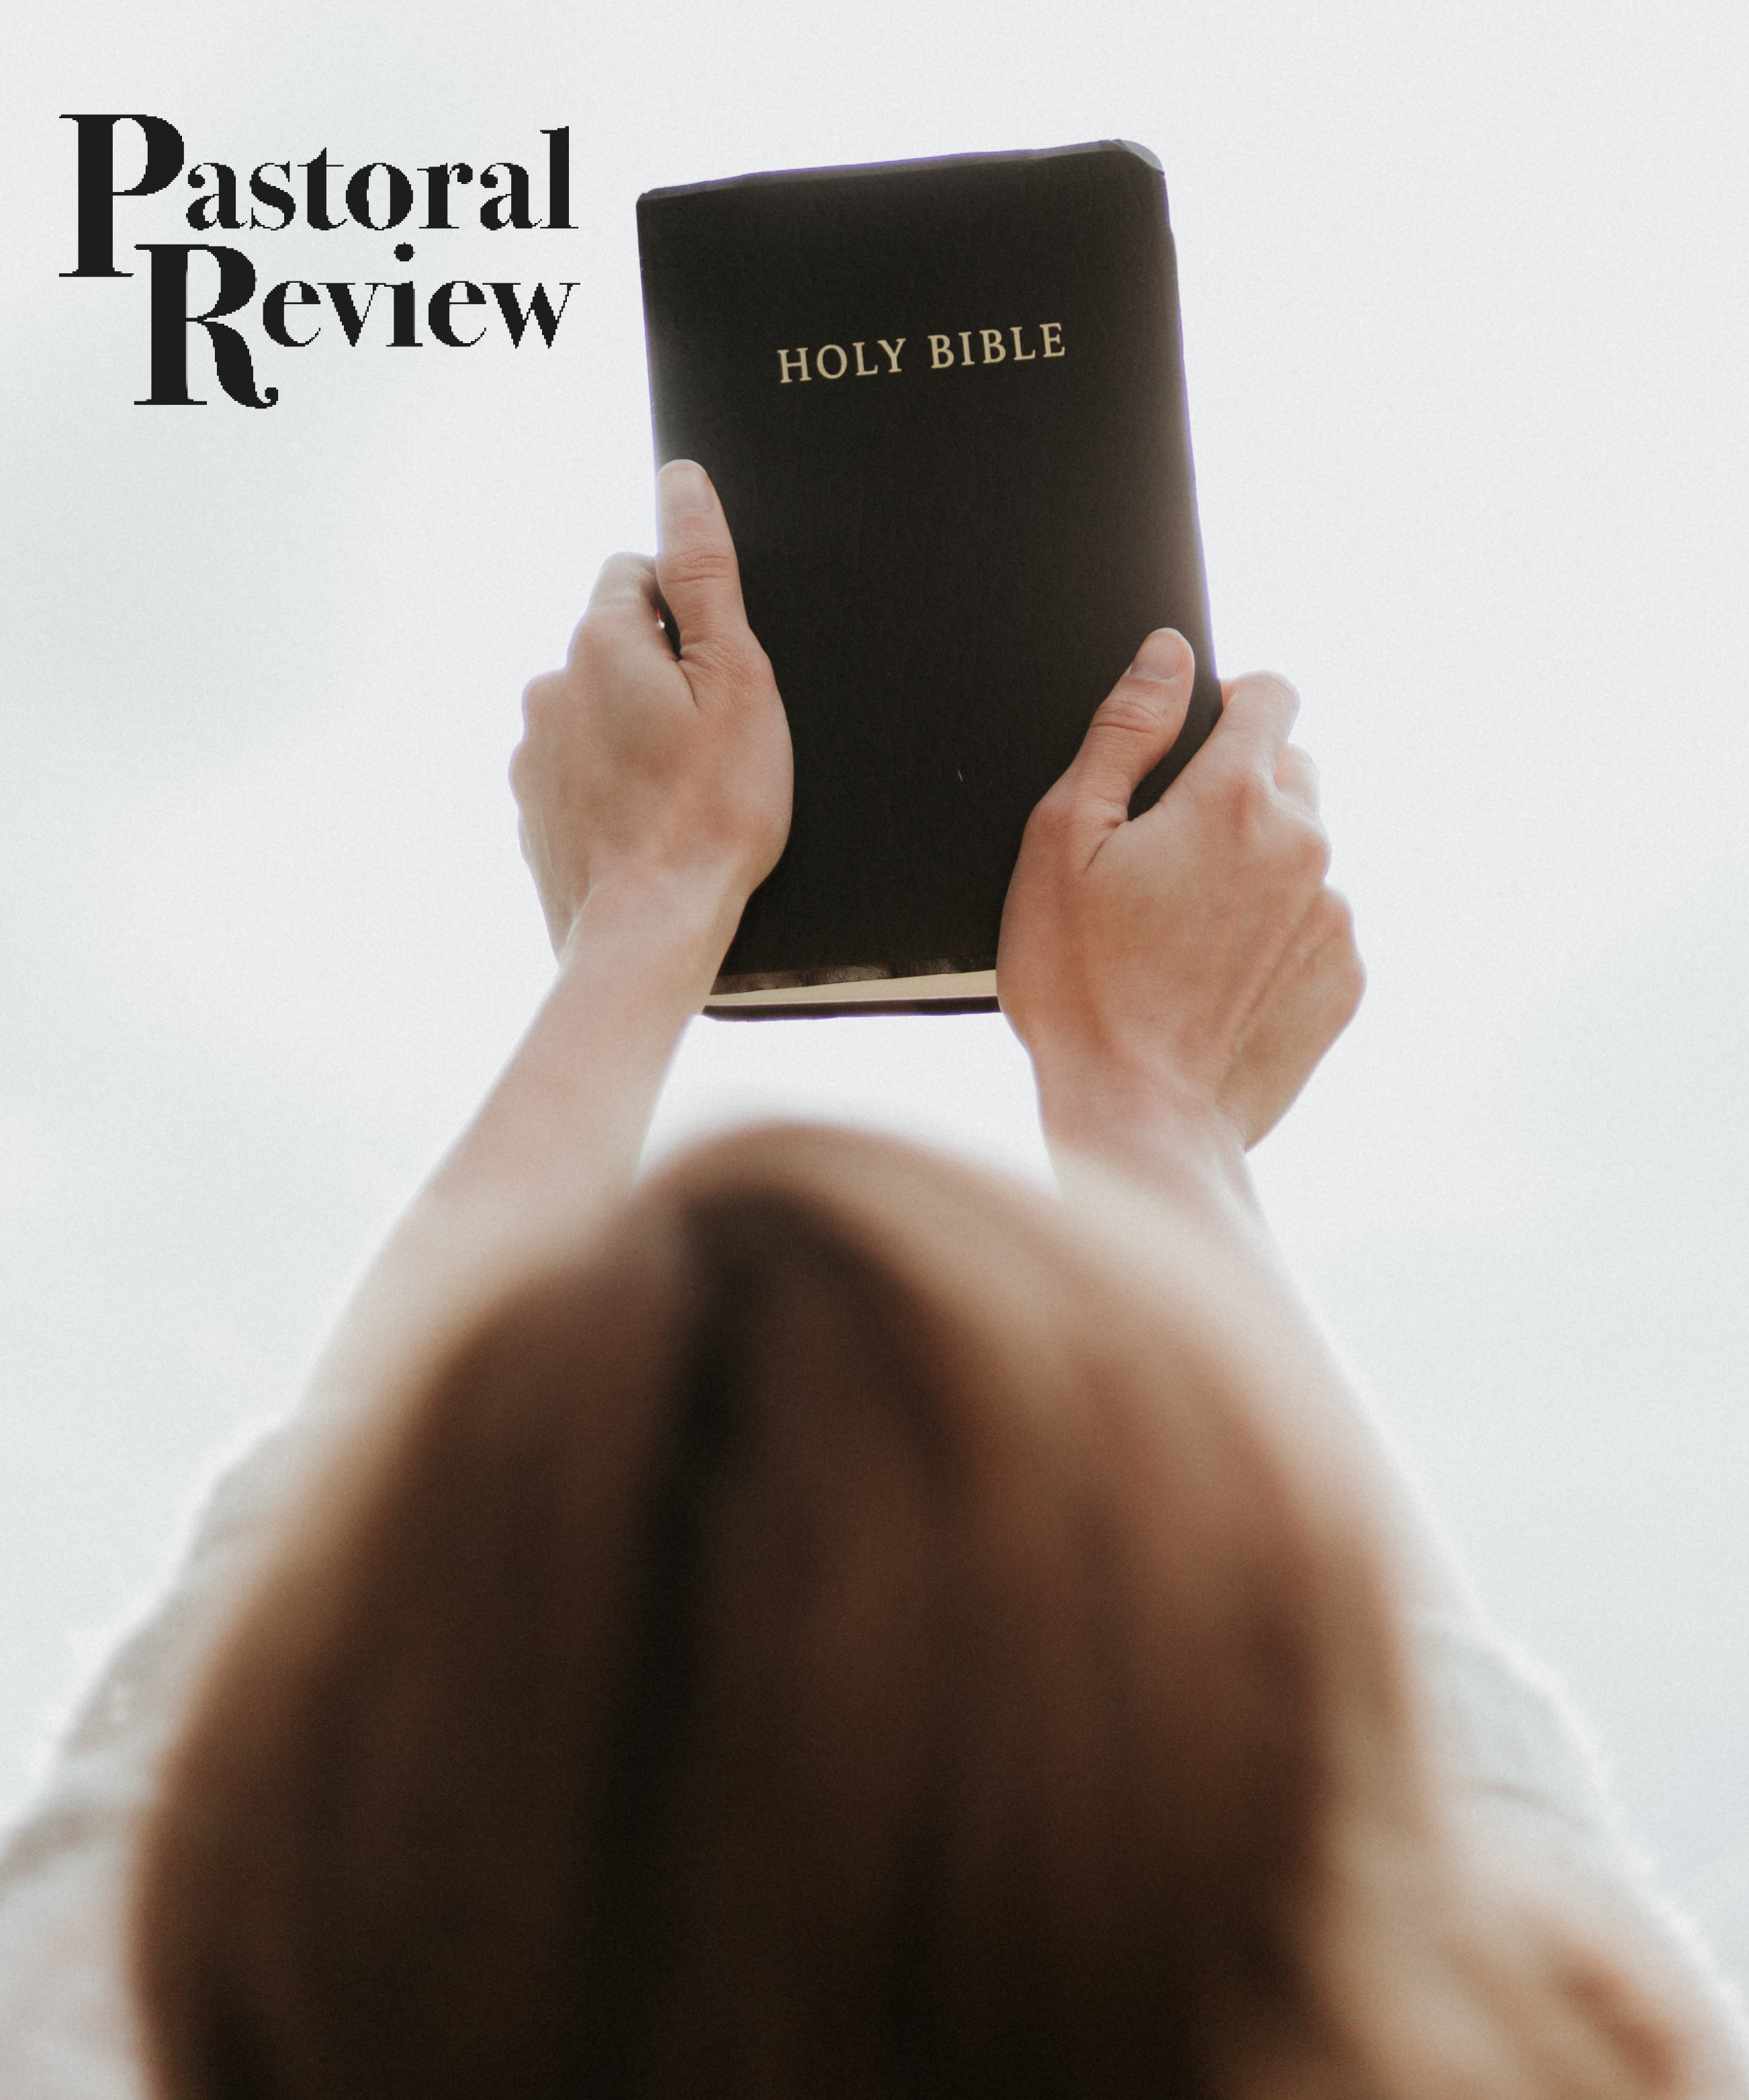 PAST EVENT: Pastoral Review Webinar: Catholics reading the Bible in 2021